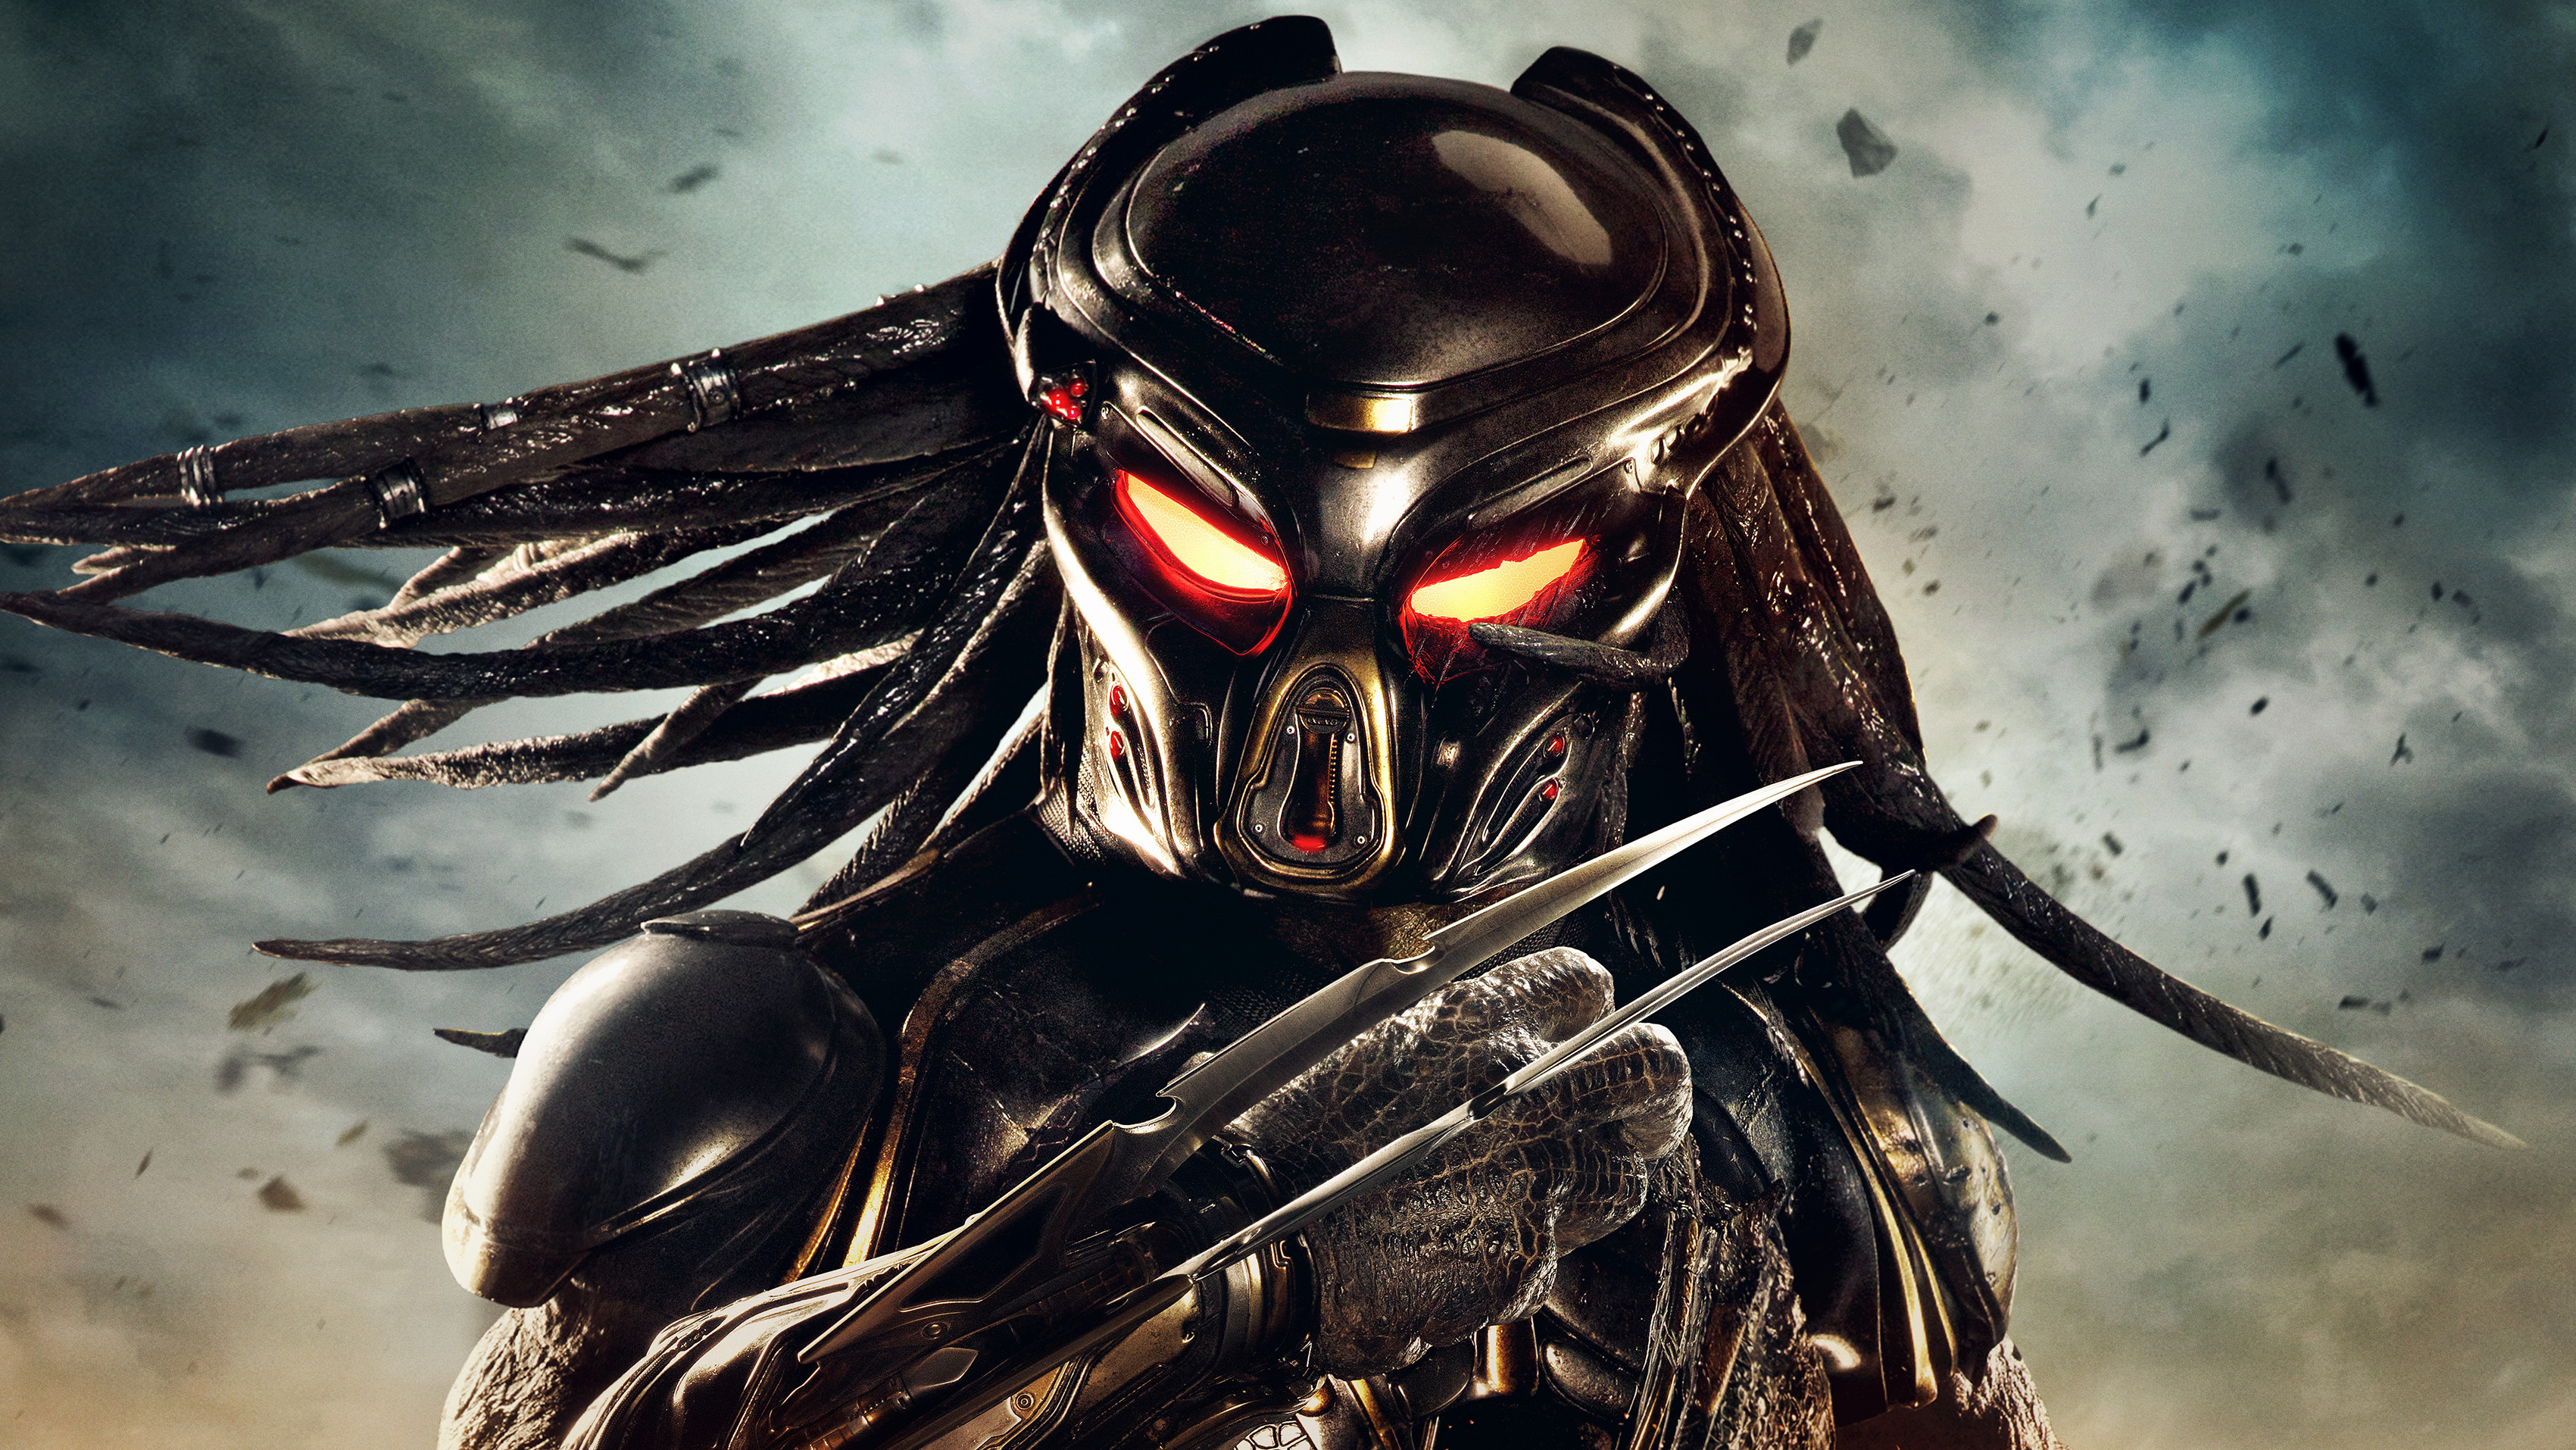 3401x1914 10+ The Predator HD Wallpapers and Backgrounds